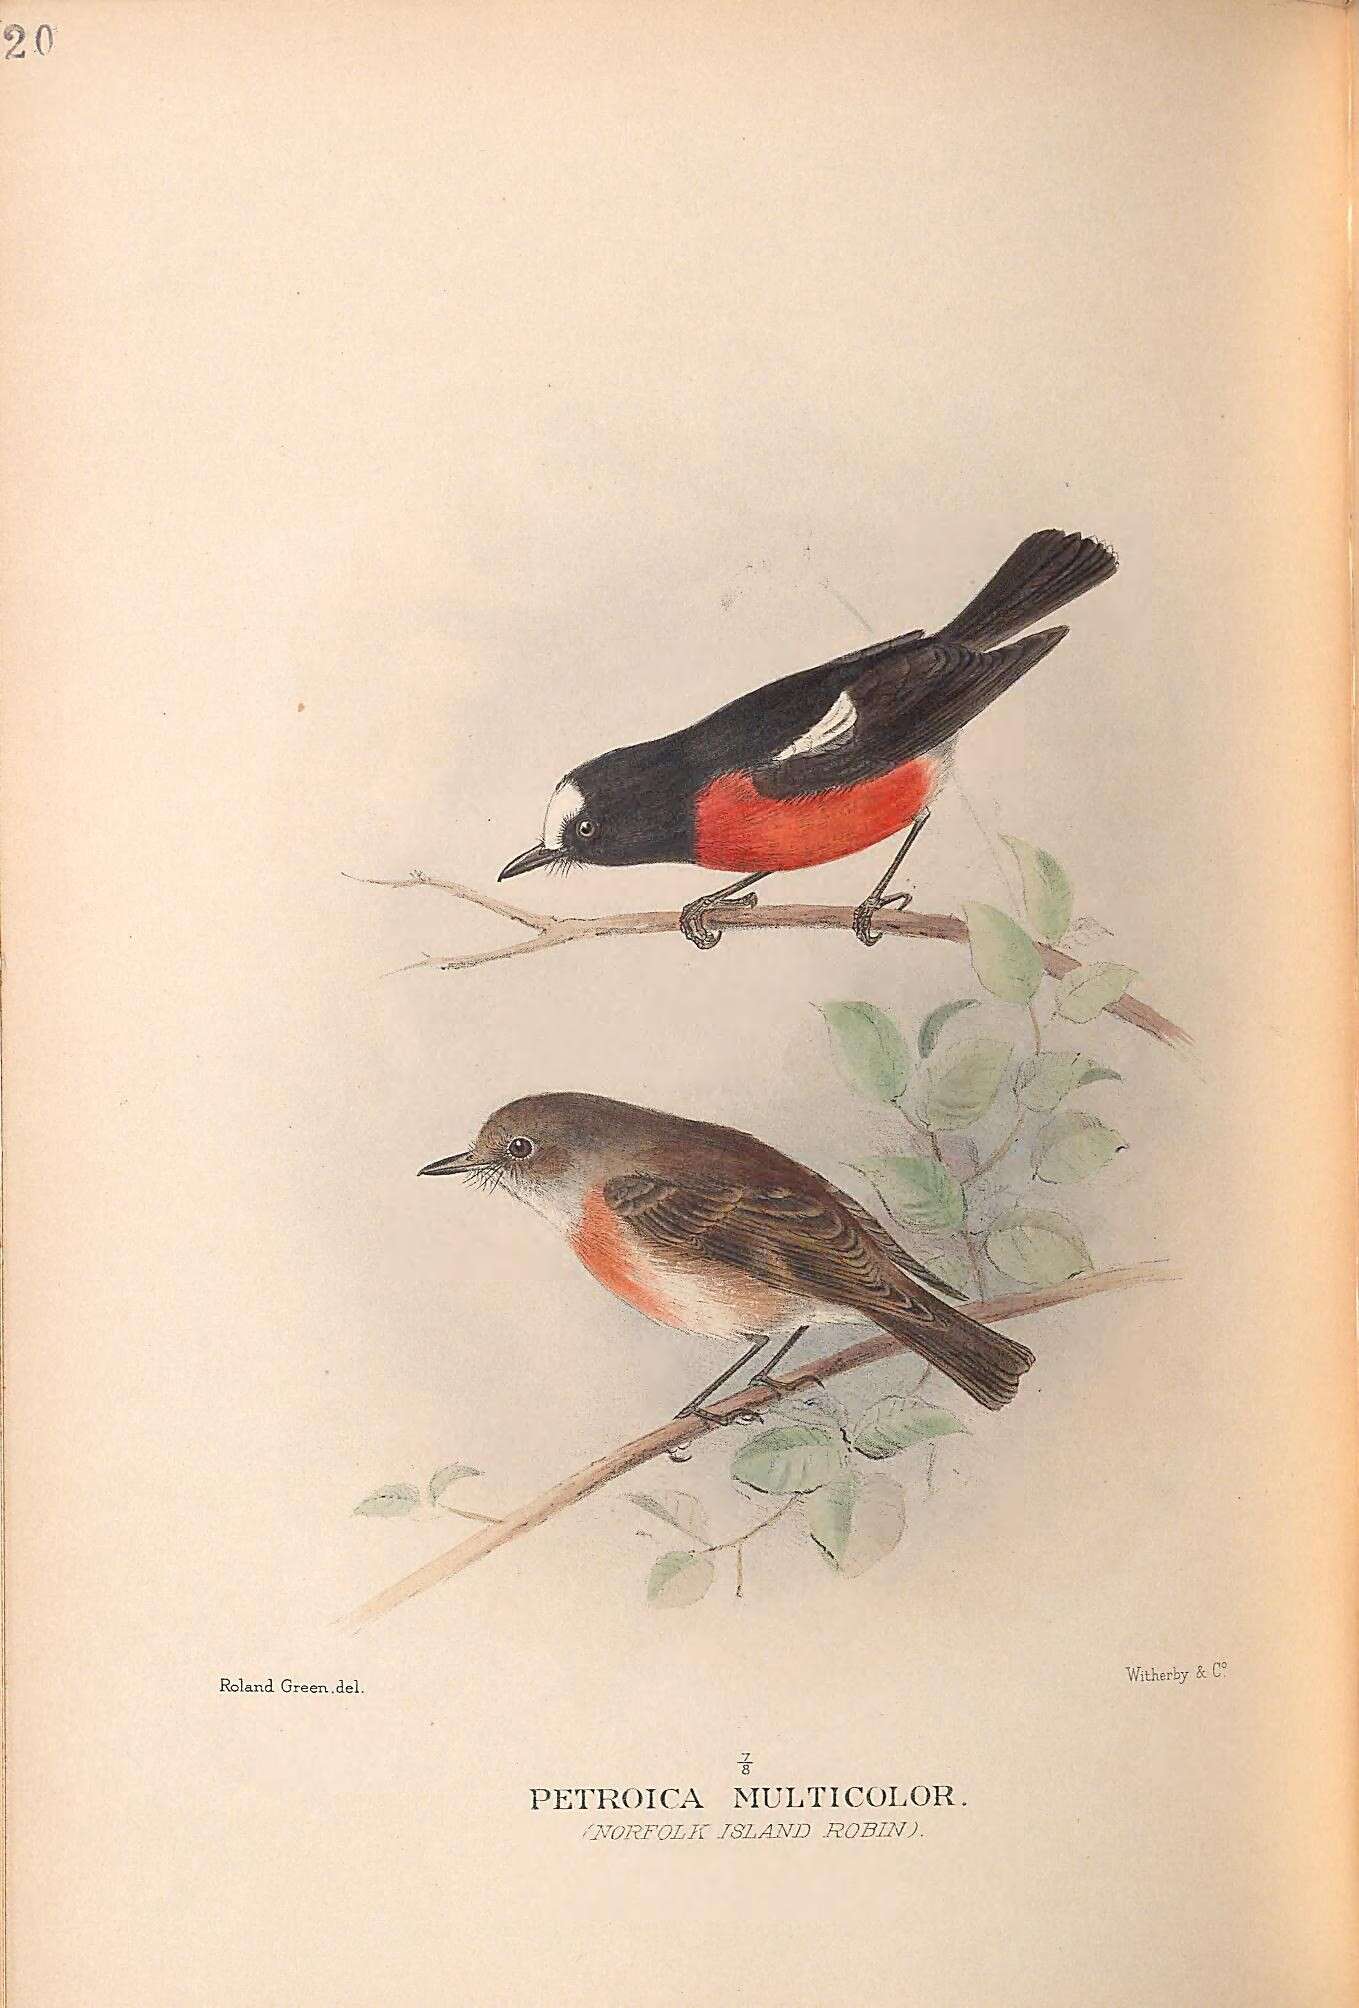 Image of Petroica Swainson 1829